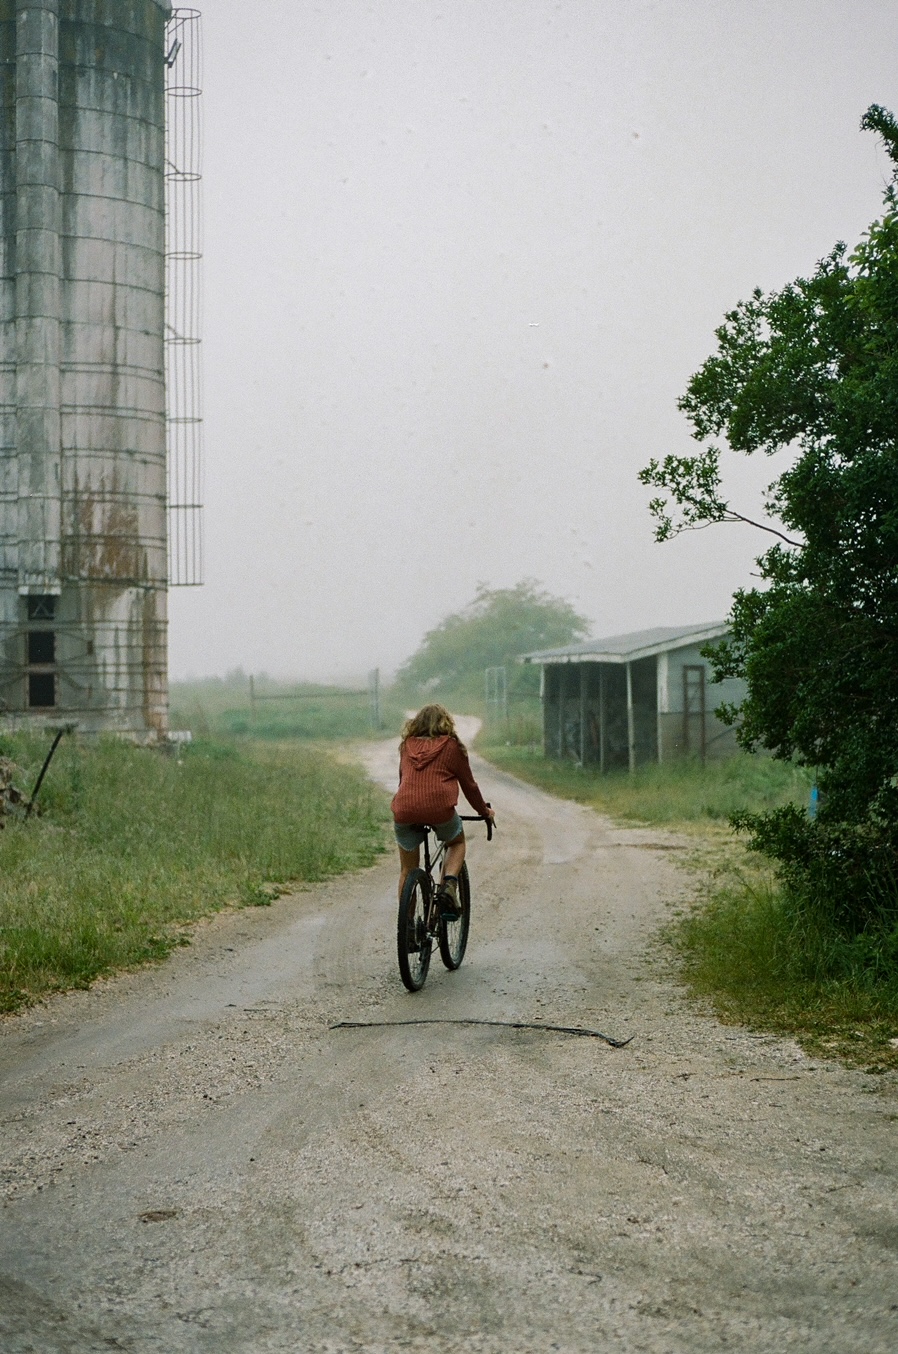 Laura rides her bike away from the camera on a dirt road, her blond hair flapping behind her. An old grain elevator and farm equipment sits to the side.